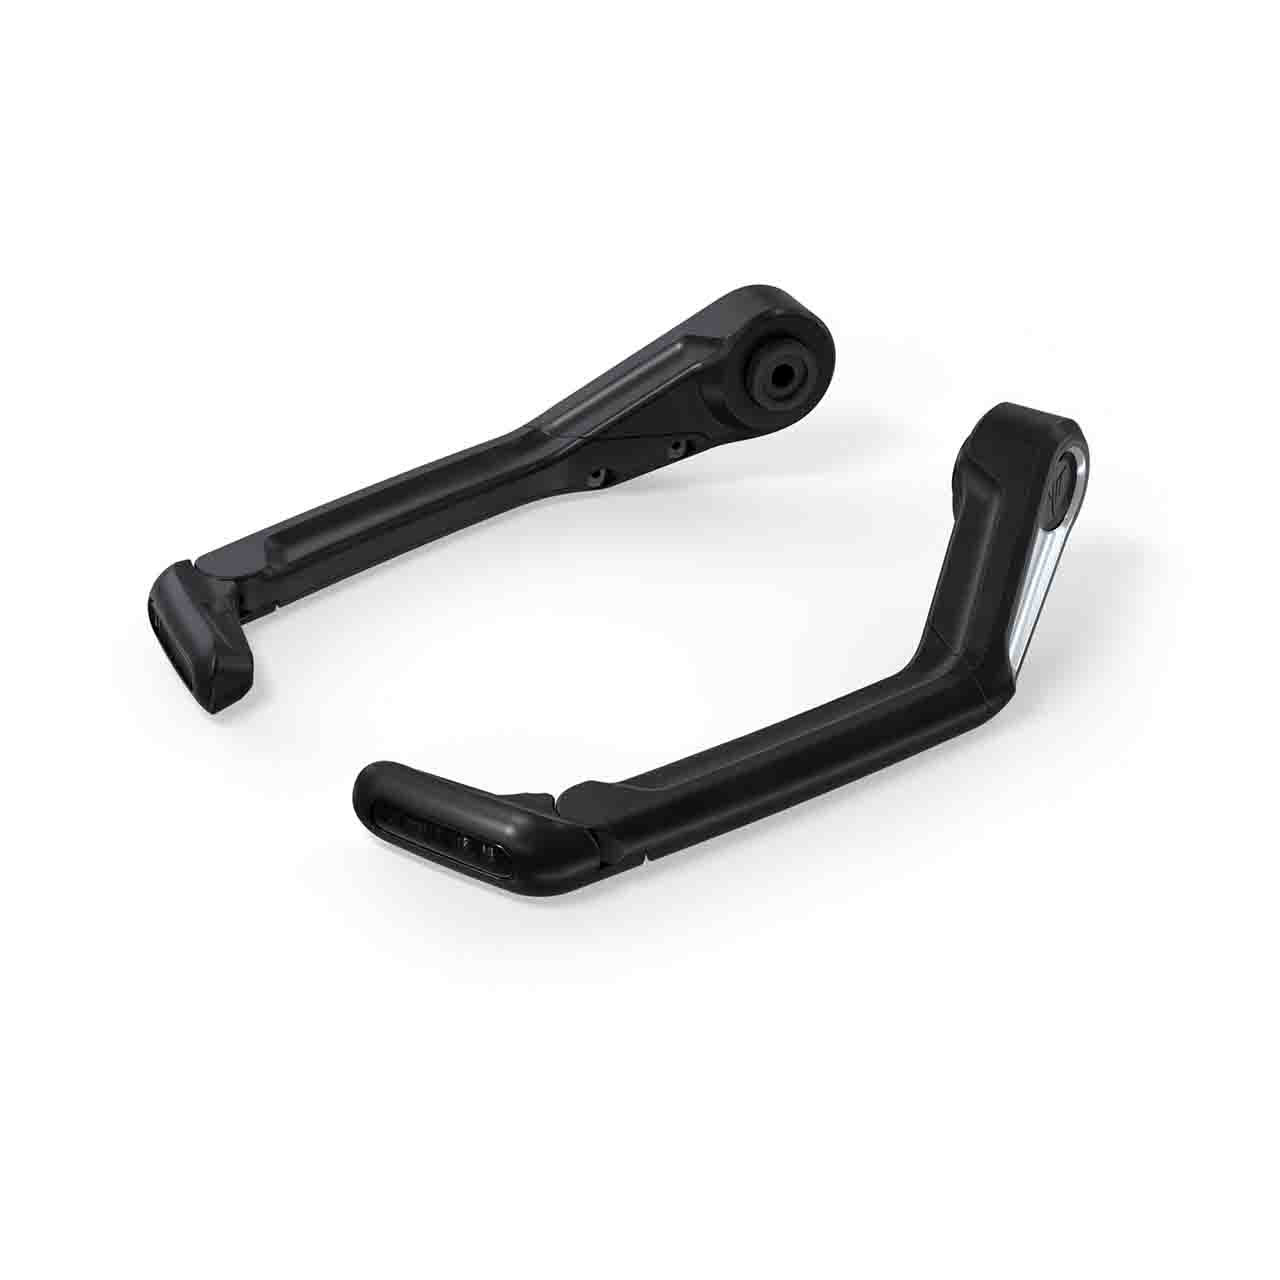 YAMAHA PROTÈGE-MAINS CLIGNOTANTS POUR MT-10 - B5YHGBLK0000